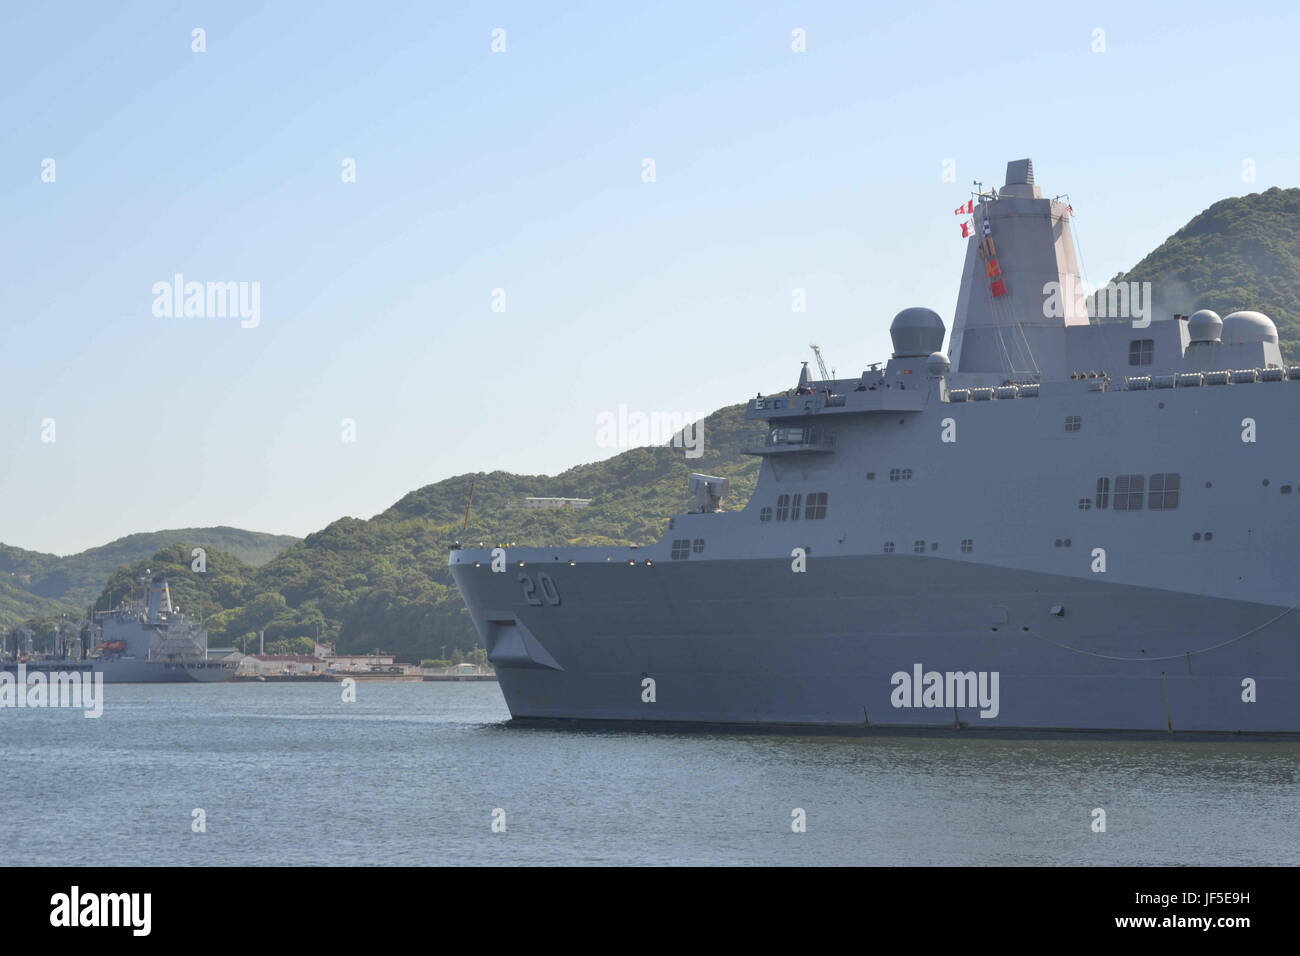 170602-N-IO414-016 SASEBO, Japan (June 2, 2017) Amphibious transport dock USS Green Bay (LPD 20) departs Fleet Activities Sasebo, Japan so it can begin its routine patrol. Green Bay will operate in the Indo-Asia-Pacific region to enhance partnerships and be a ready-response force for any type of contingency. (U.S. Navy photo by Mass Communication Specialist 2nd Class Jordan Crouch/Released) Stock Photo